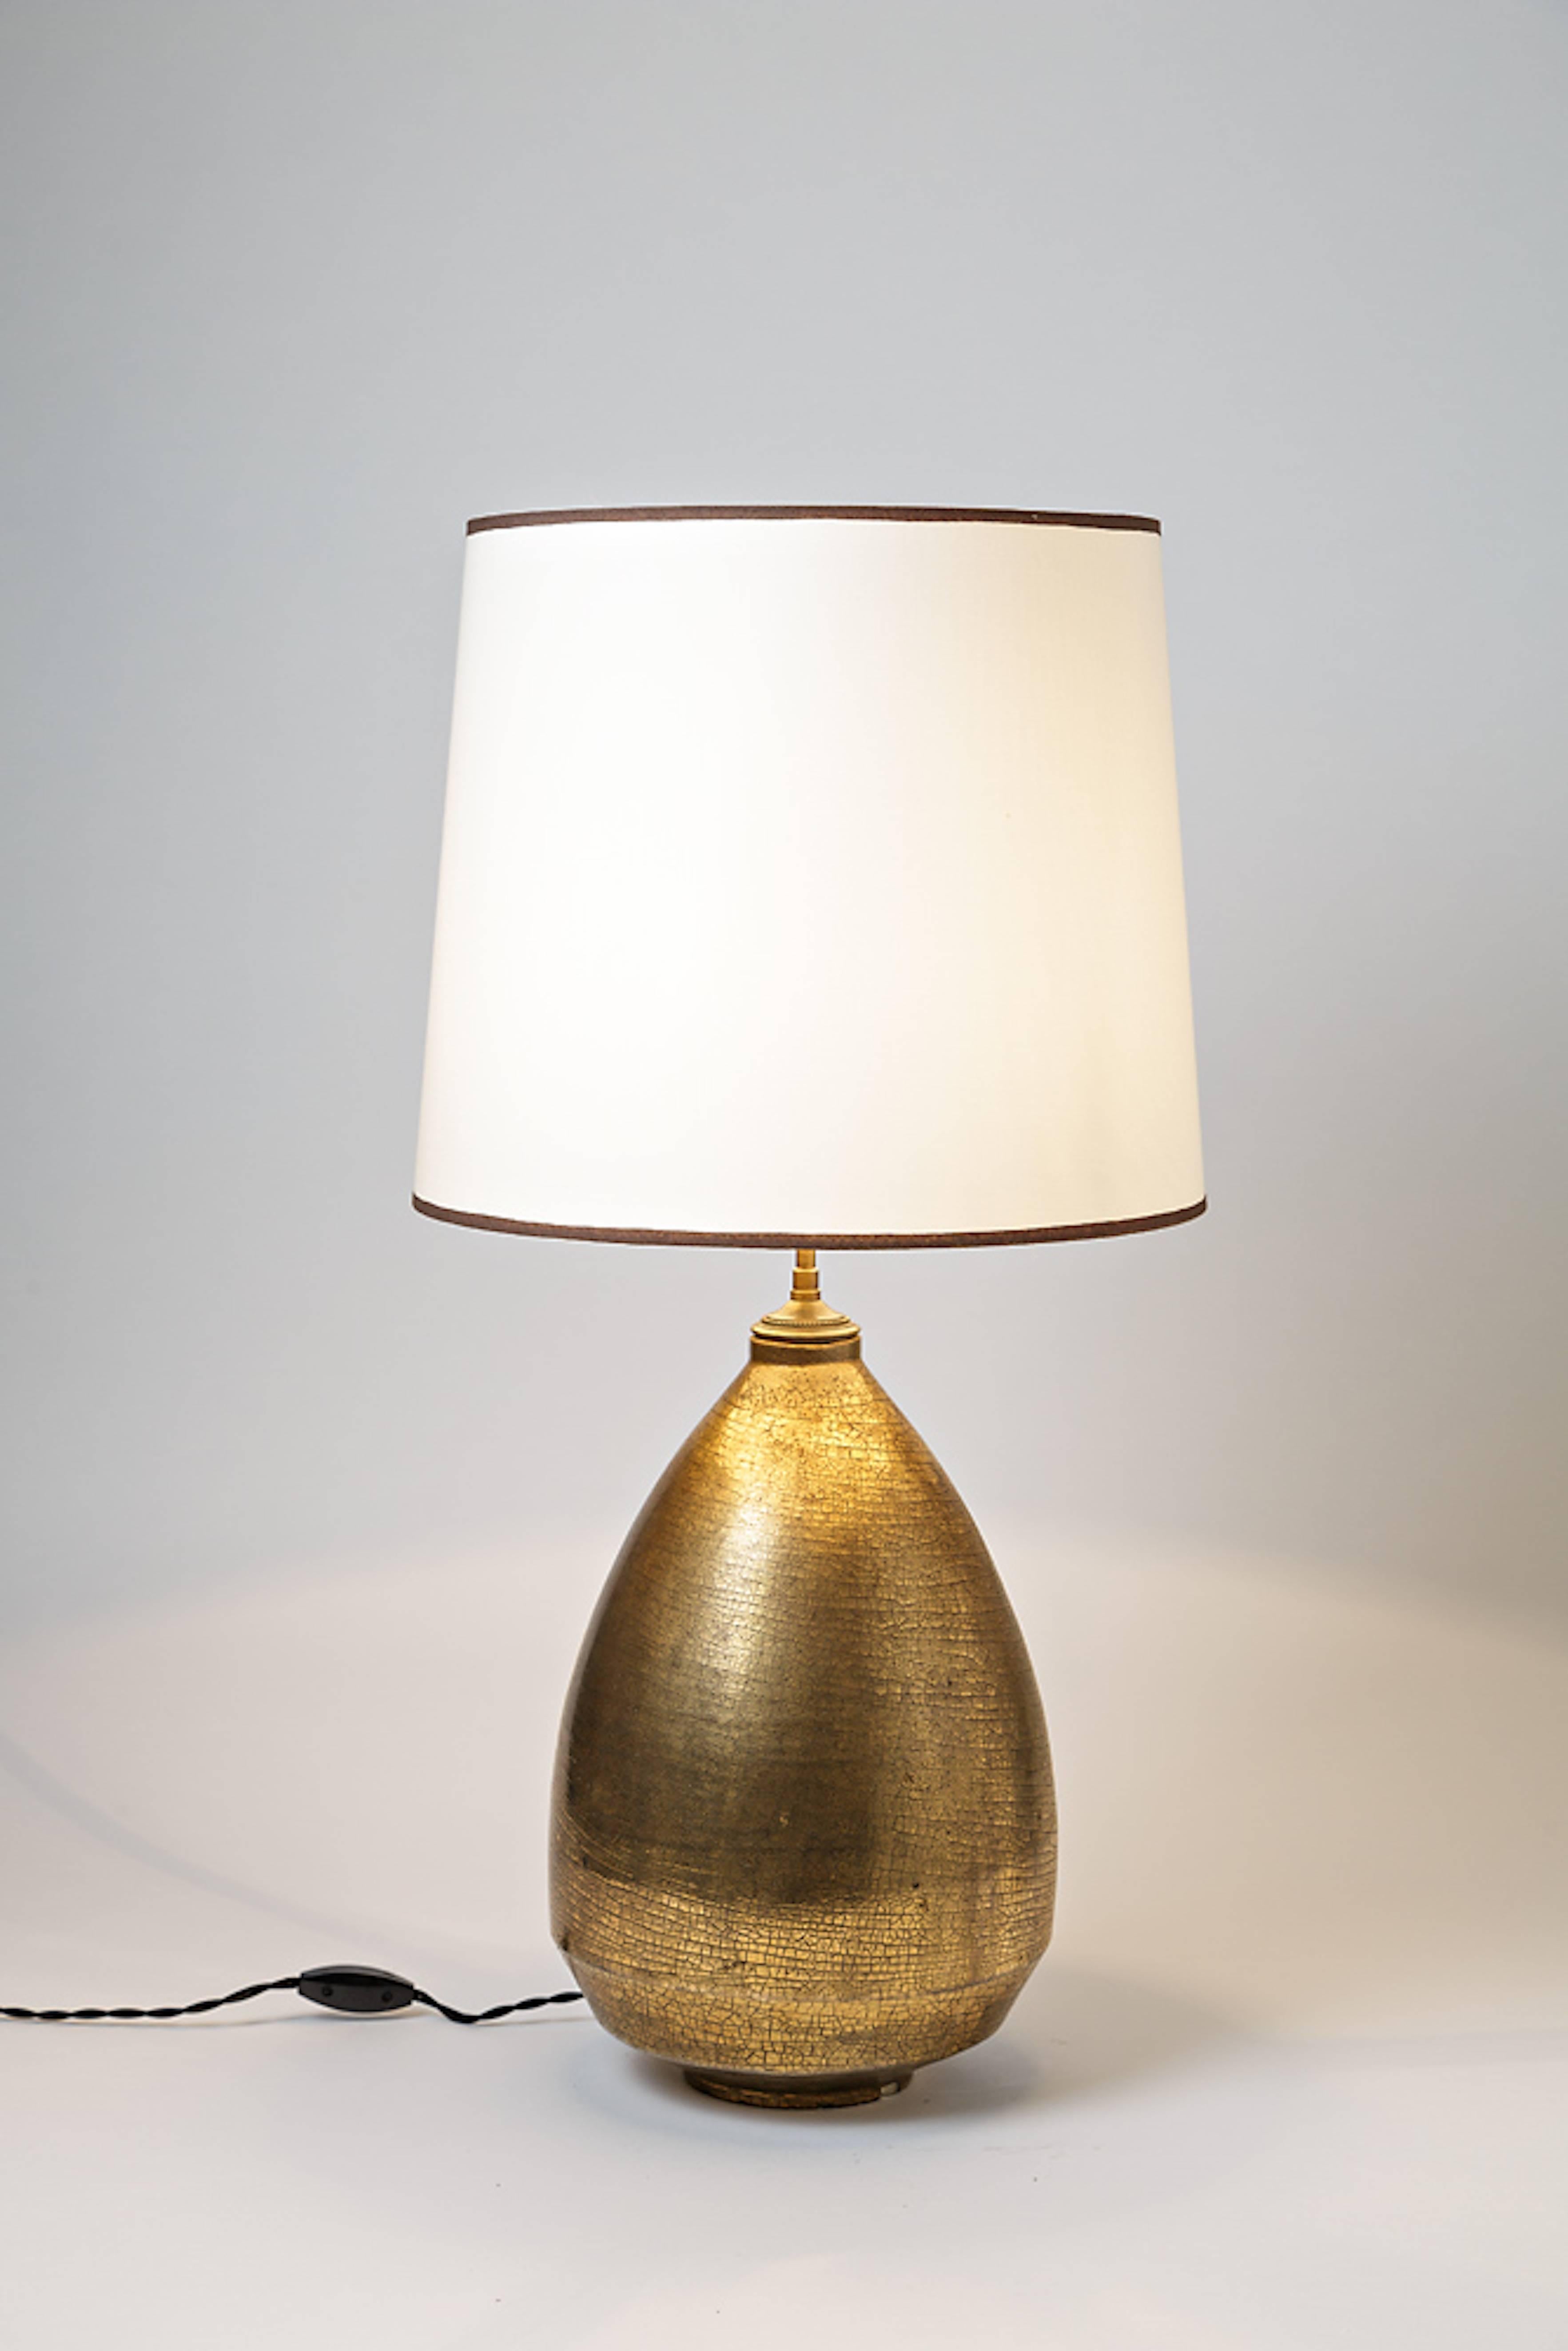 Turned Important Ceramic Lamp with Gold Glaze by Marcel Guillard, circa 1930